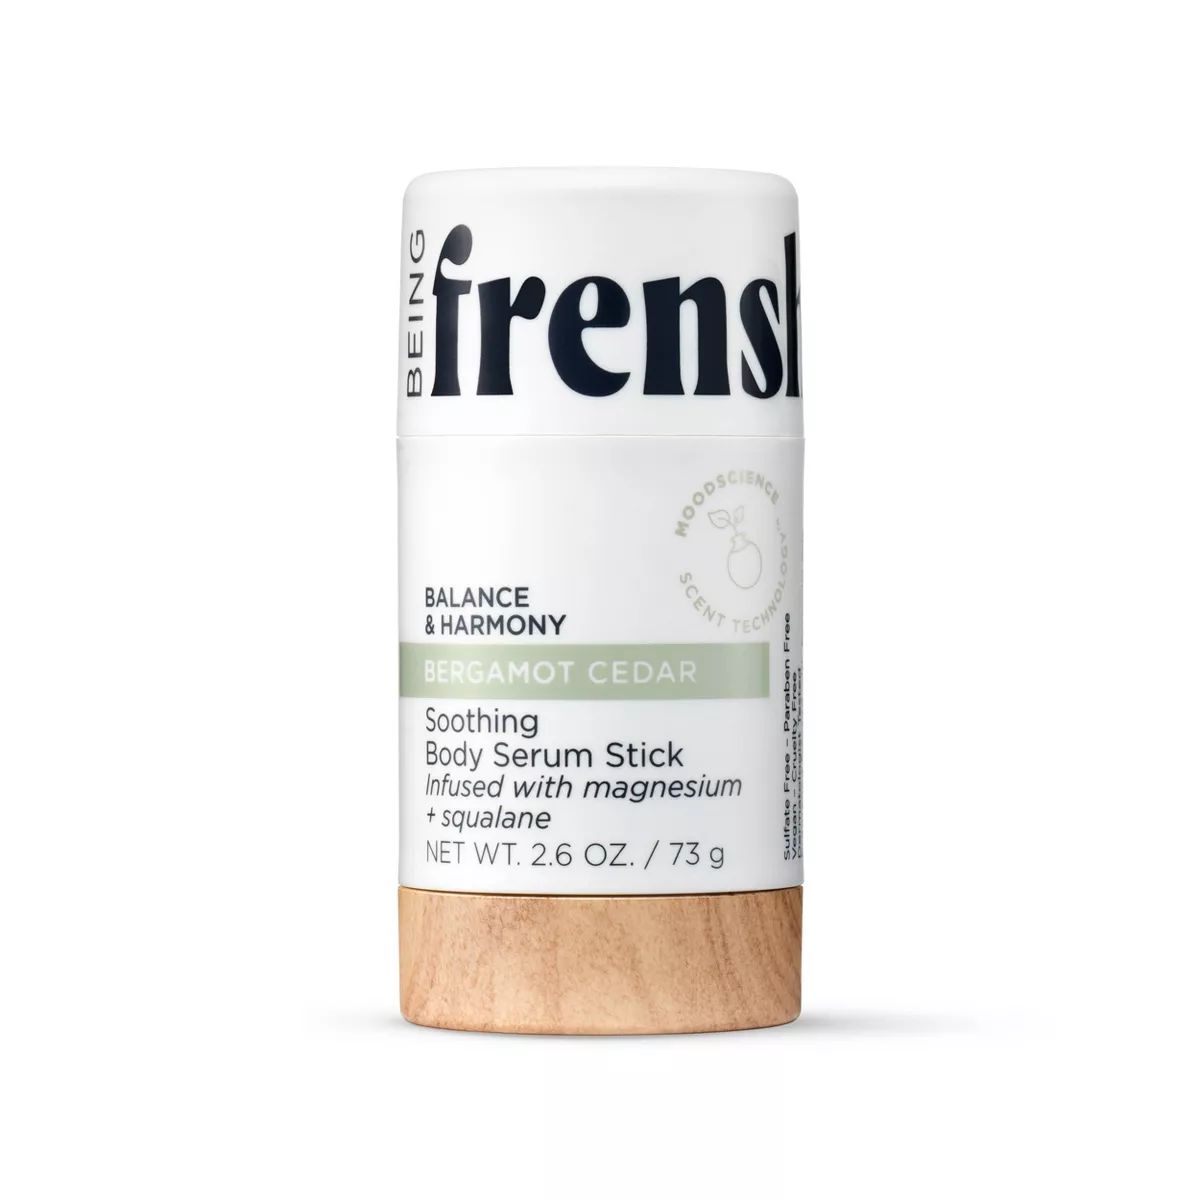 Being Frenshe Soothing and Hydrating Body Serum Stick with Magnesium - Bergamot Cedar - 2.6oz | Target